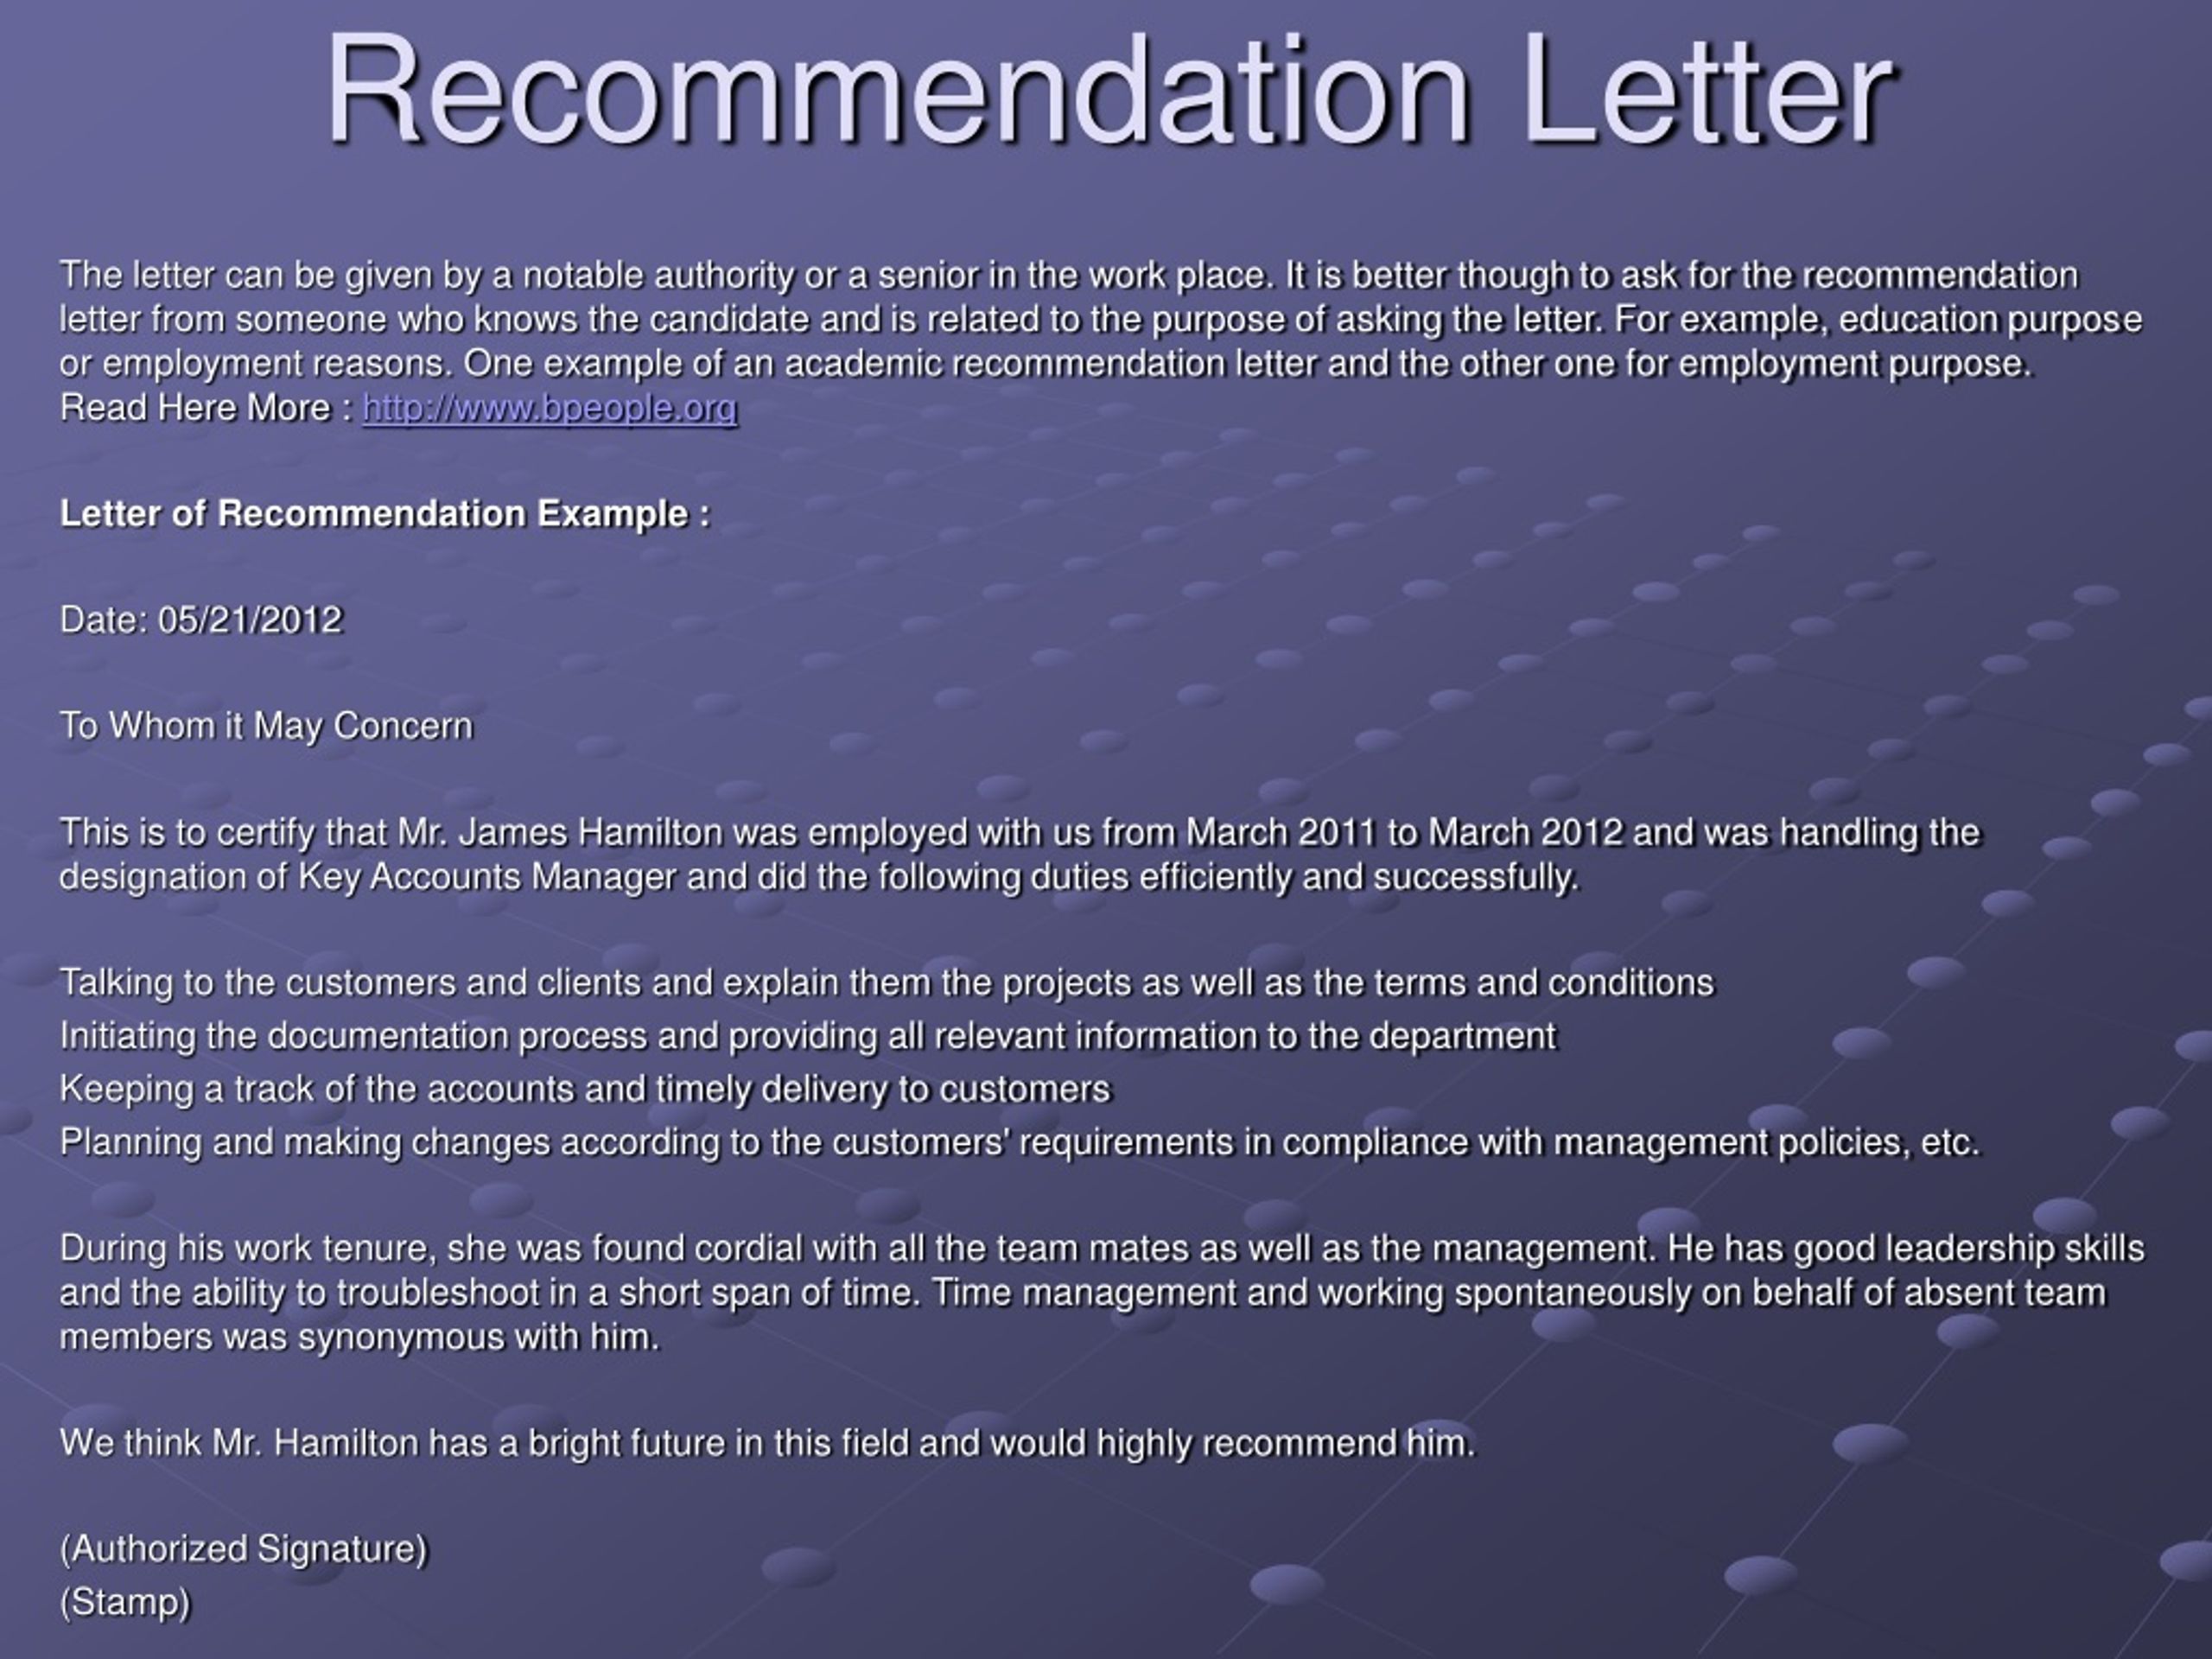 PPT - Recommendation Letter PowerPoint Presentation, free download